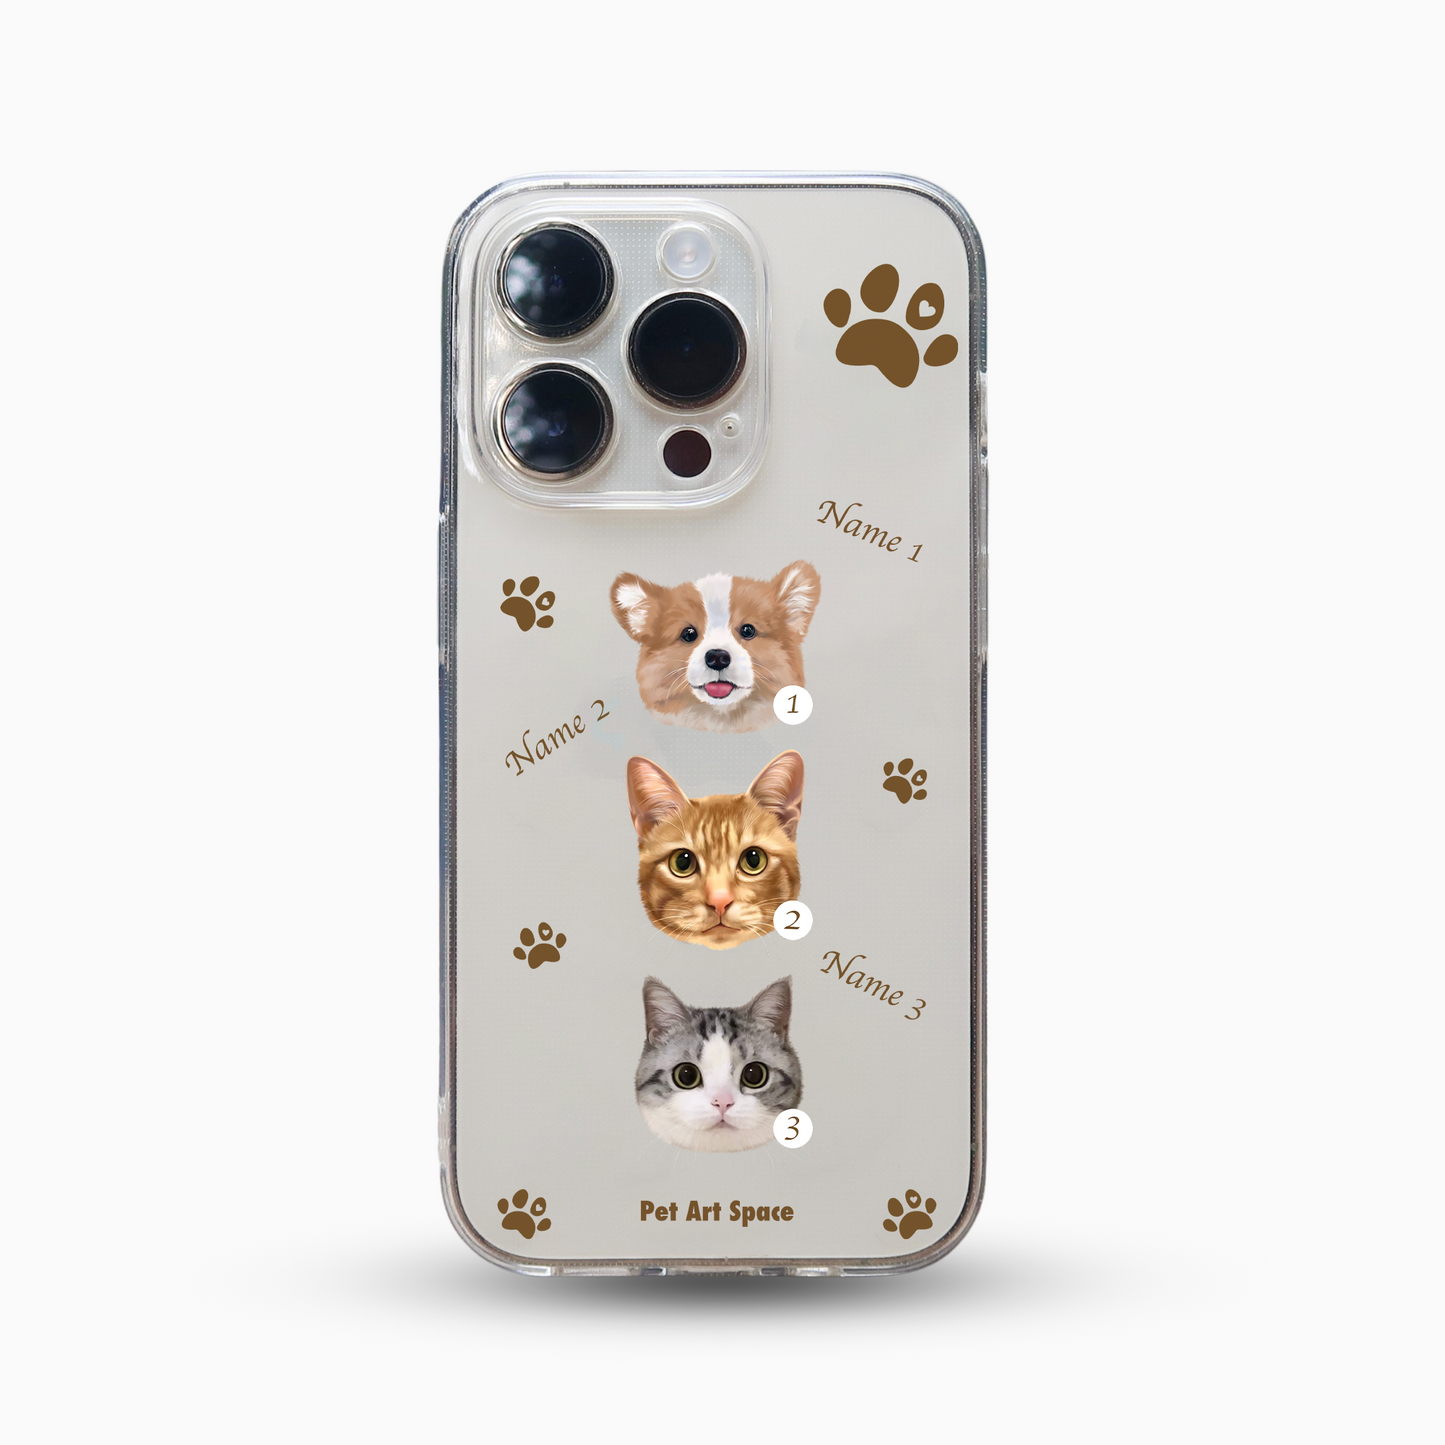 Paws for 3 Pets - Soft Clear Case with Camera Covered